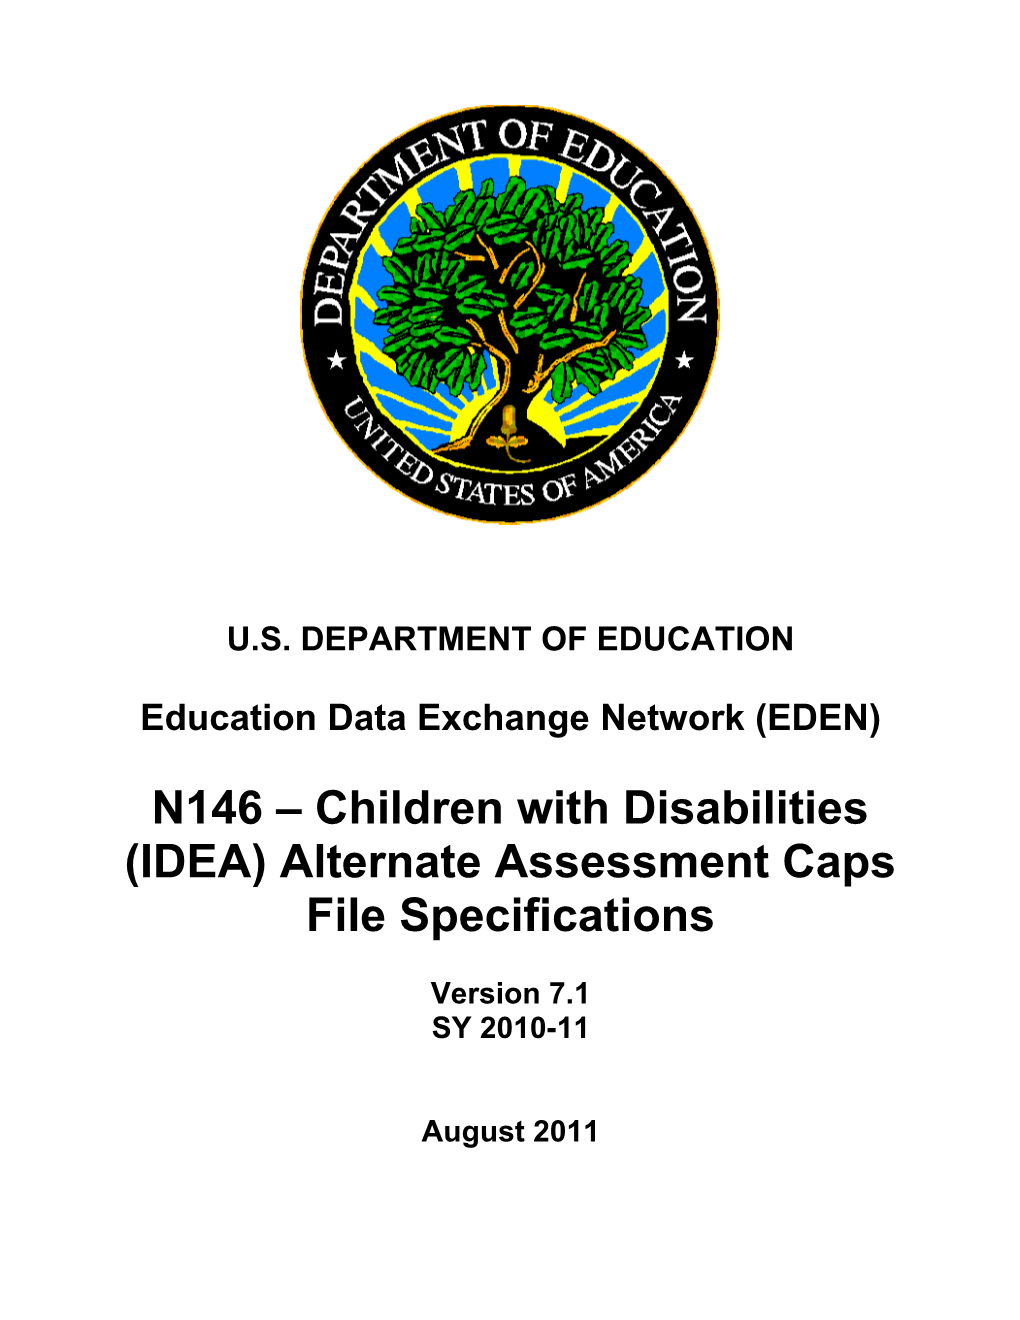 Children with Disabilities (IDEA) Alternate Assessment Caps File Specifications